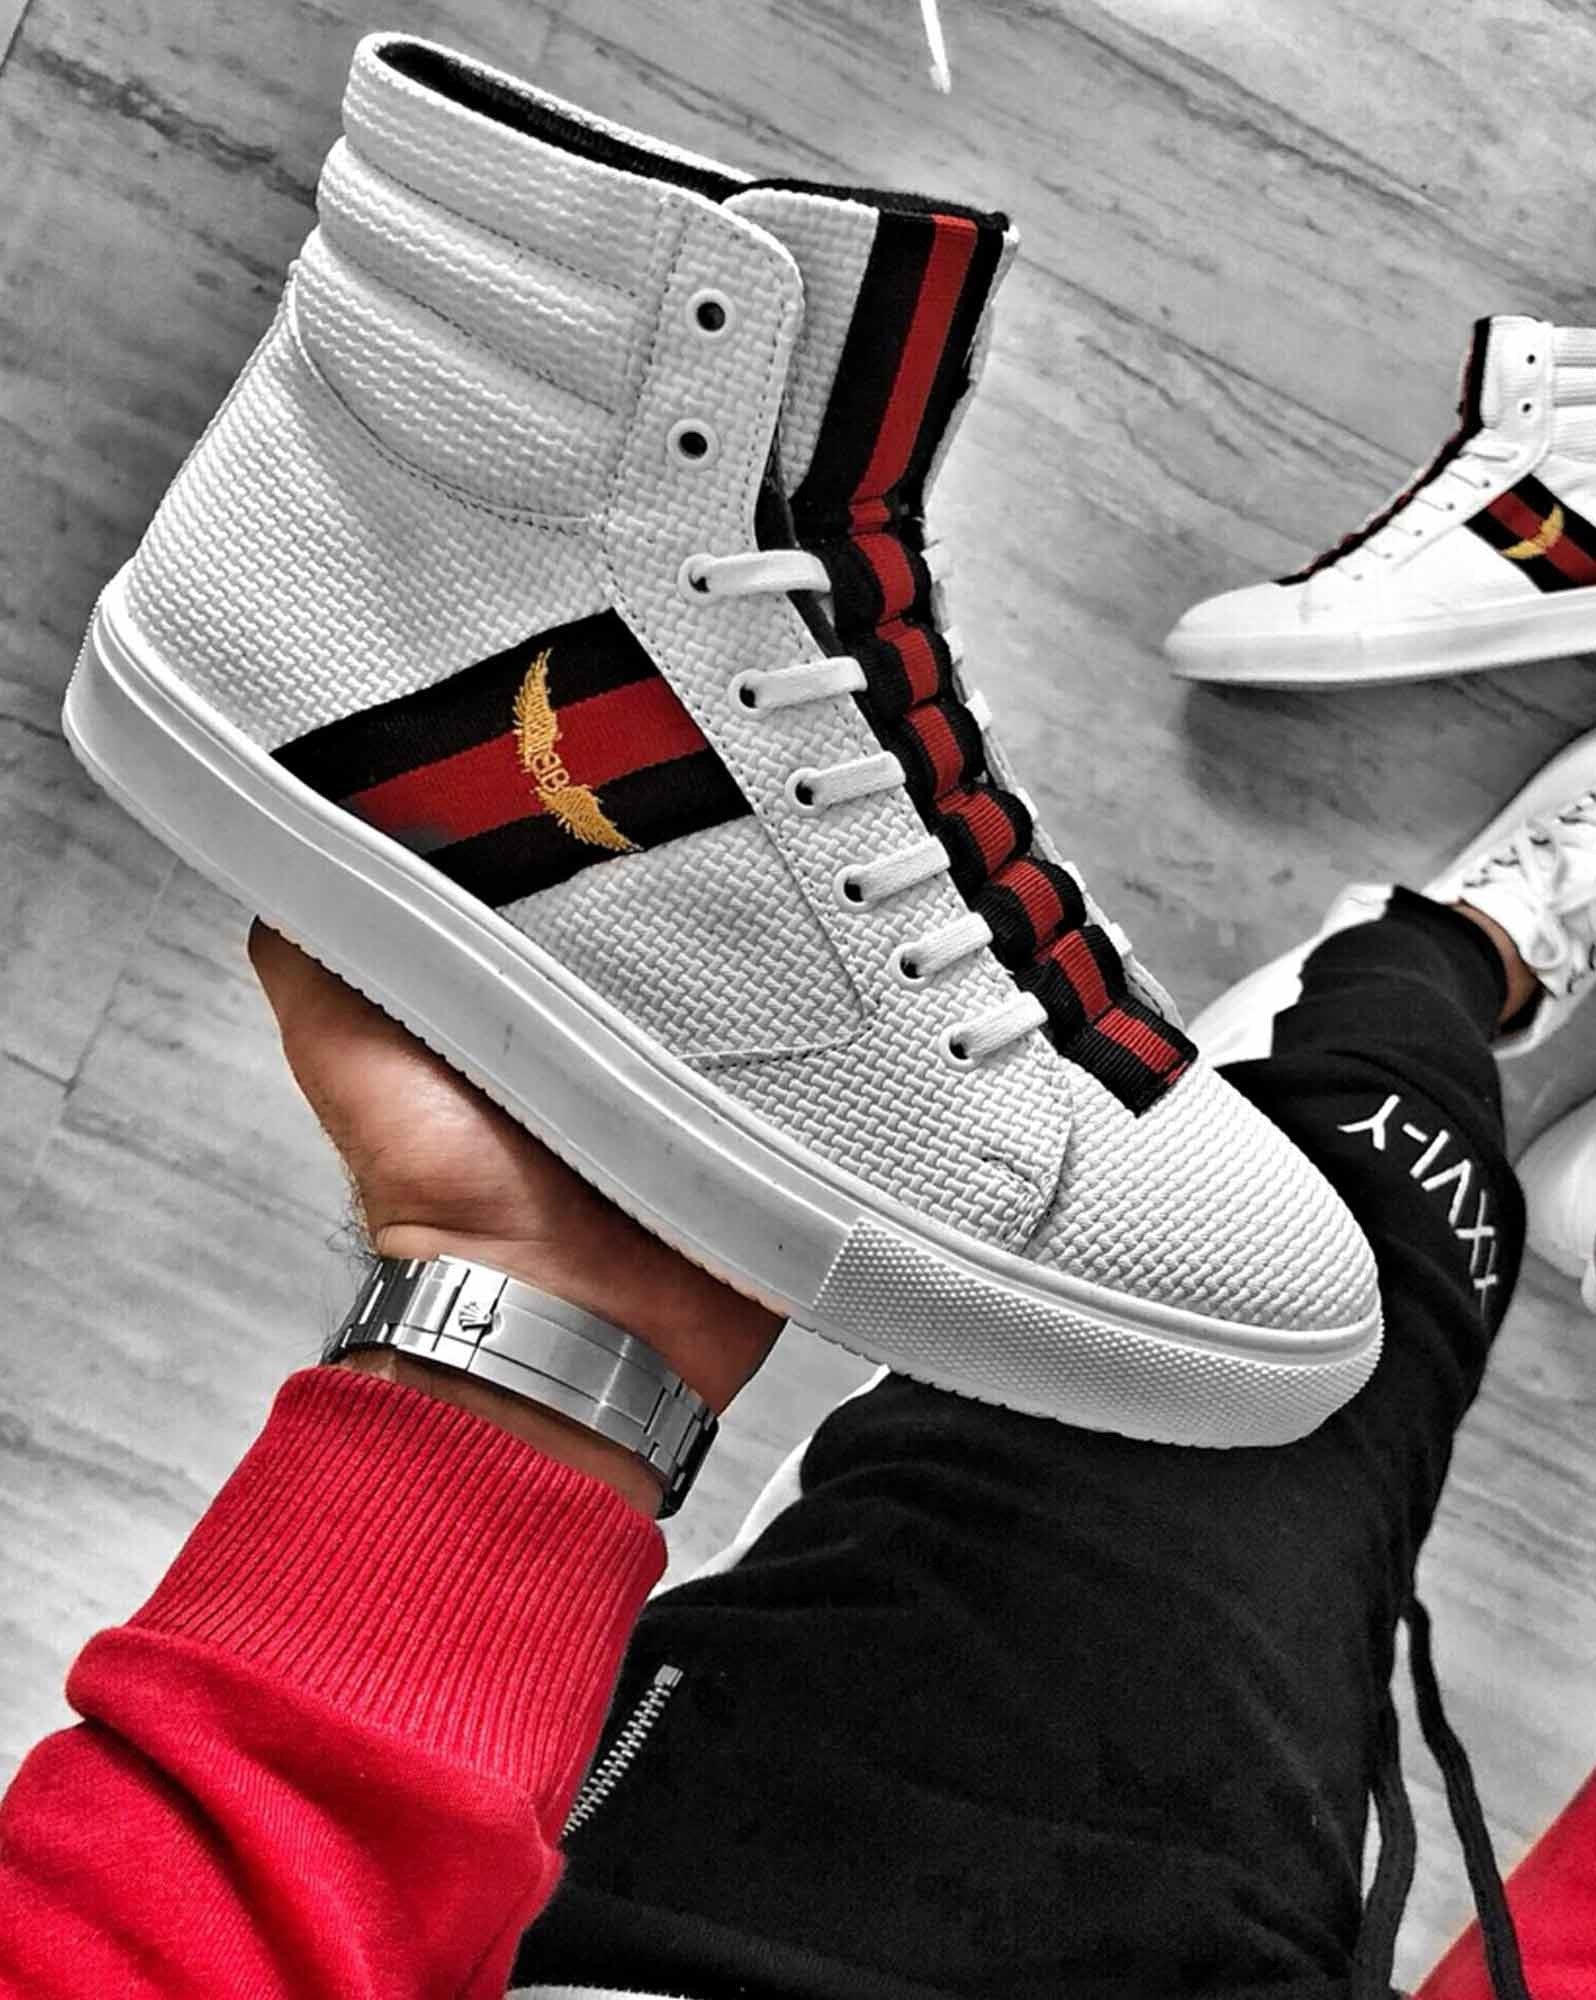 White high top sneakers with red black stripes